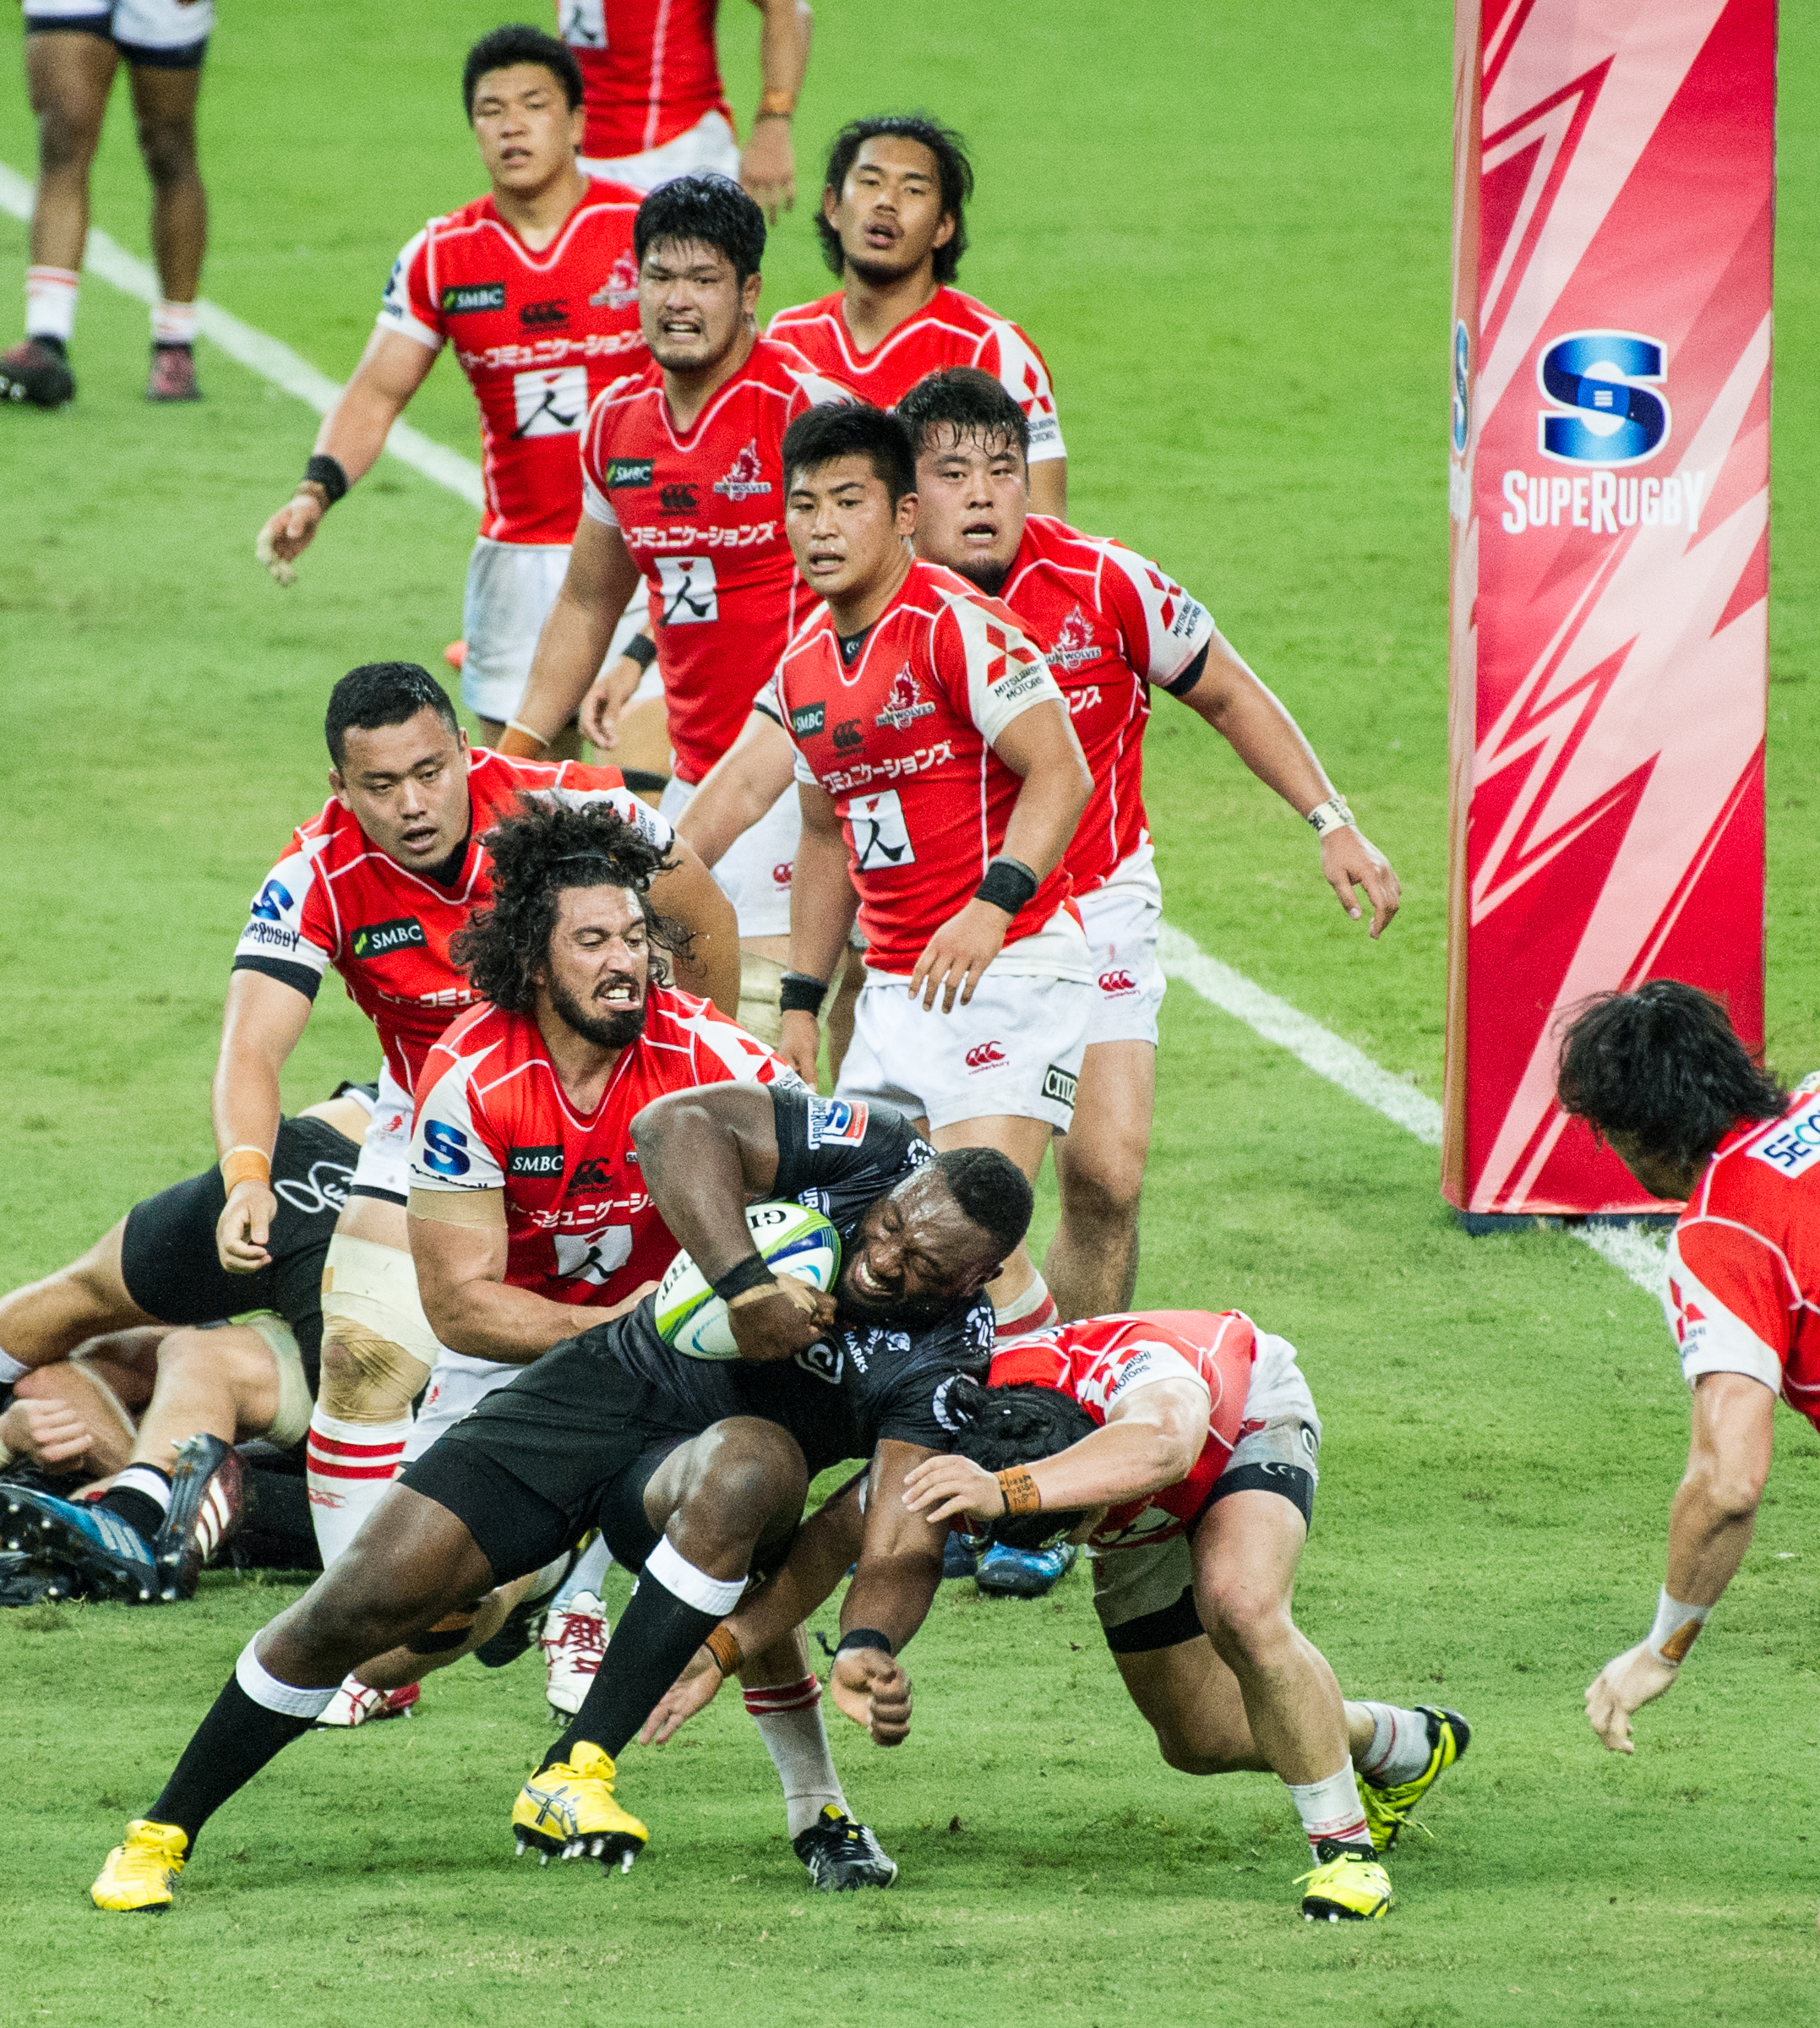 A South African player charges past a pack of Japanese players during a Super Rugby match at the Singapore Sports Hub.